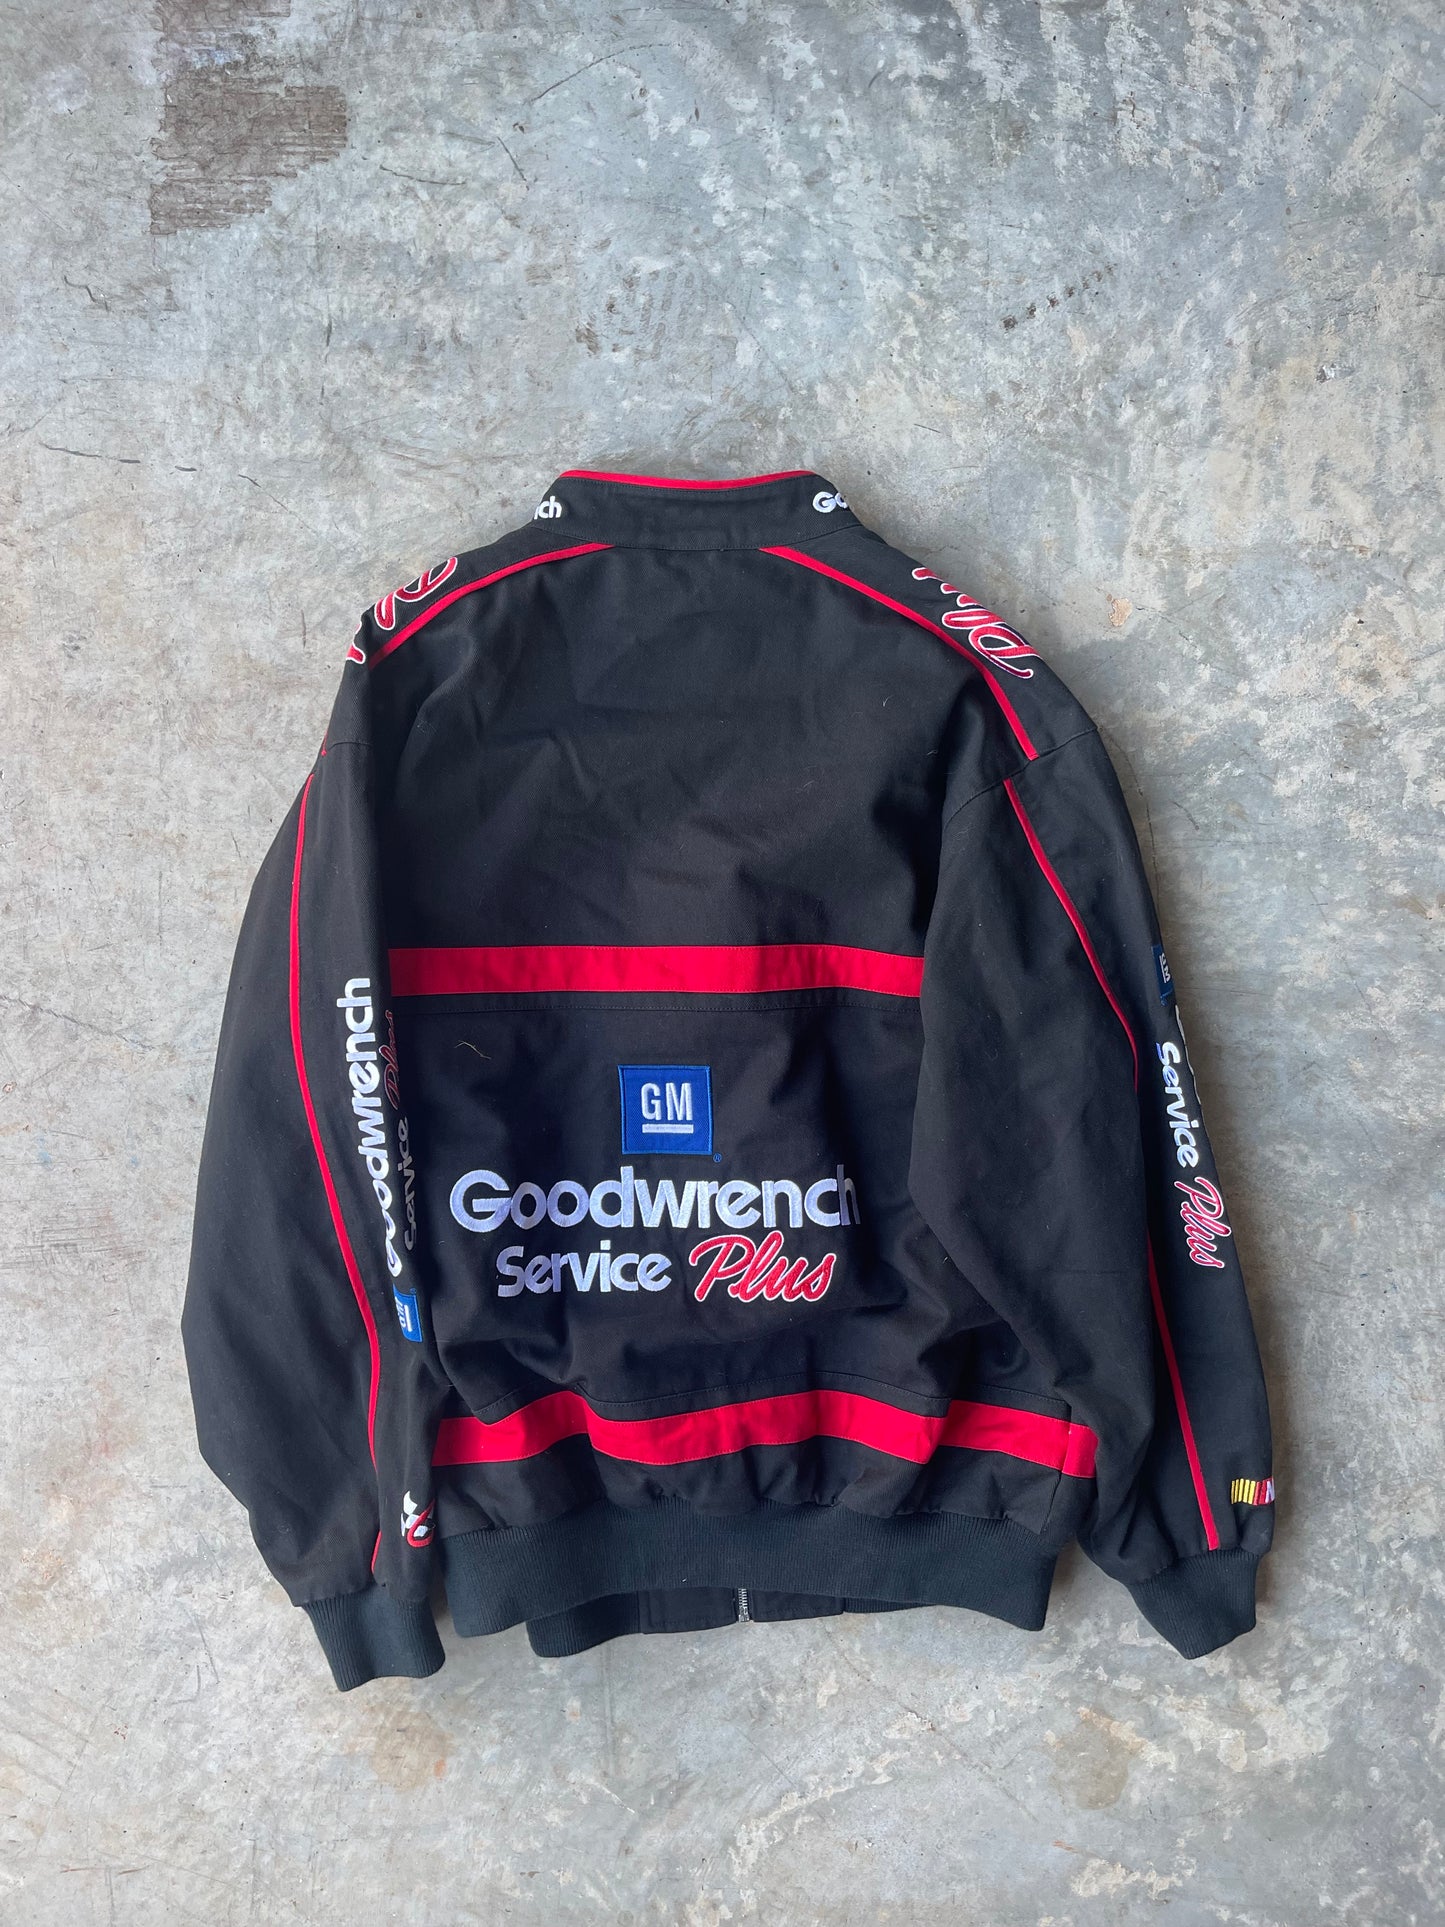 Goodwrench Racing Jacket